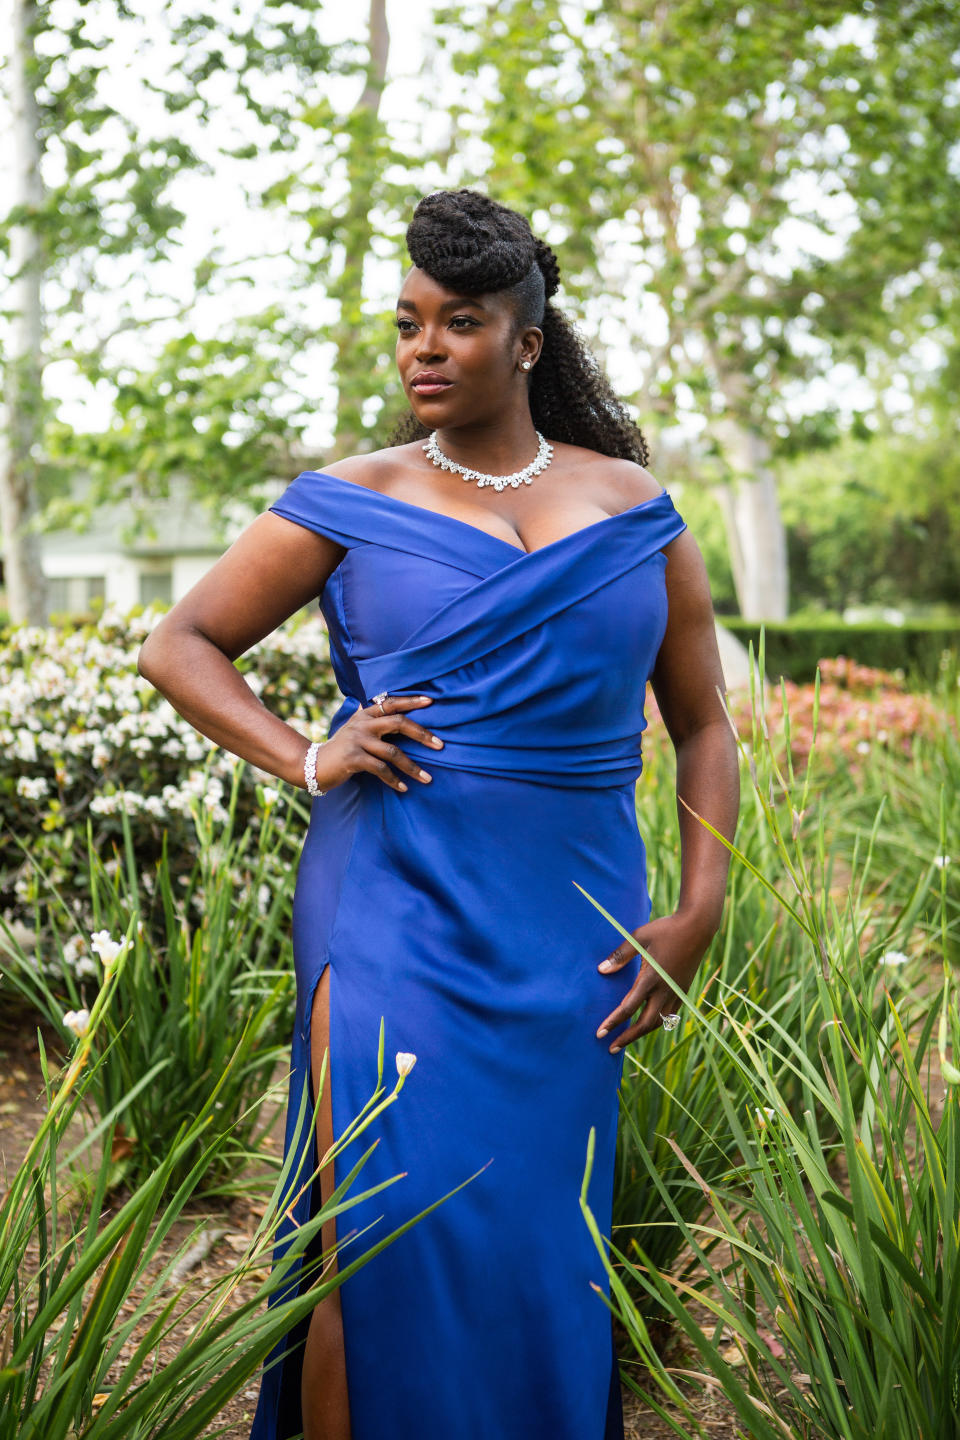 LOS ANGELES, CALIFORNIA - APRIL 11: Actress Wunmi Mosaku nominated for best actress in a leading role for 